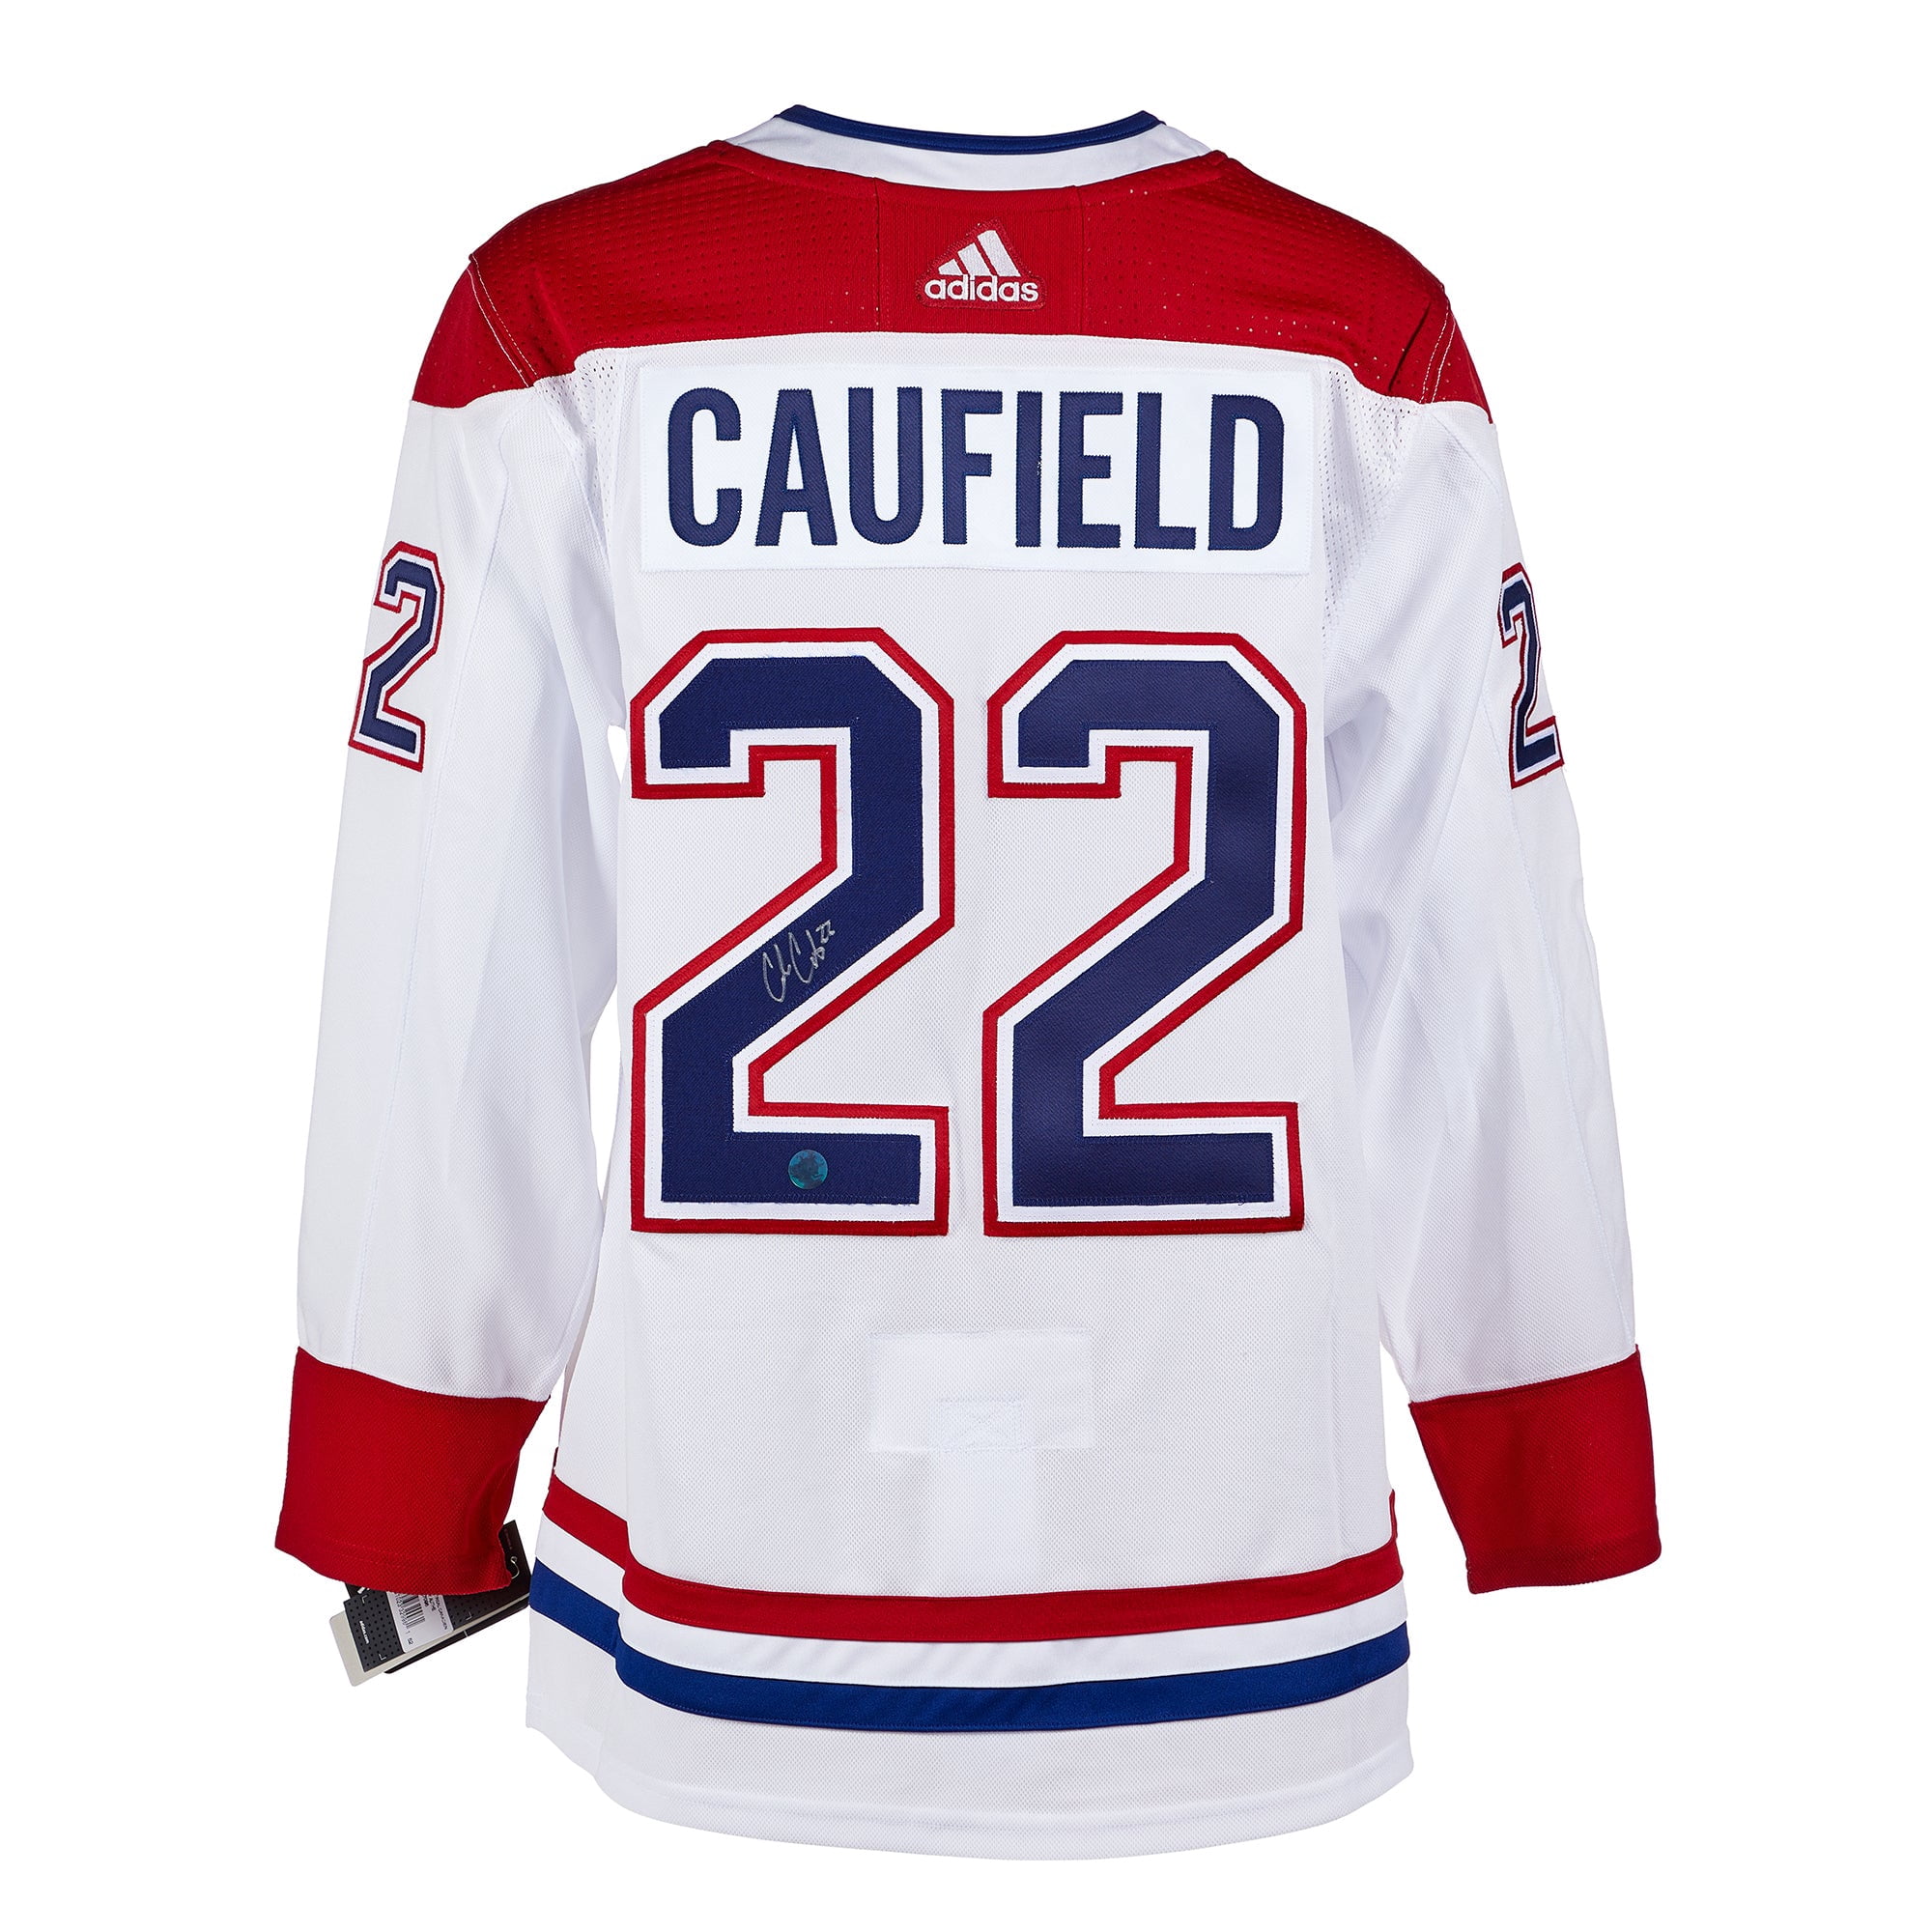 Cole Caufield Montreal Canadiens Signed White Adidas Jersey